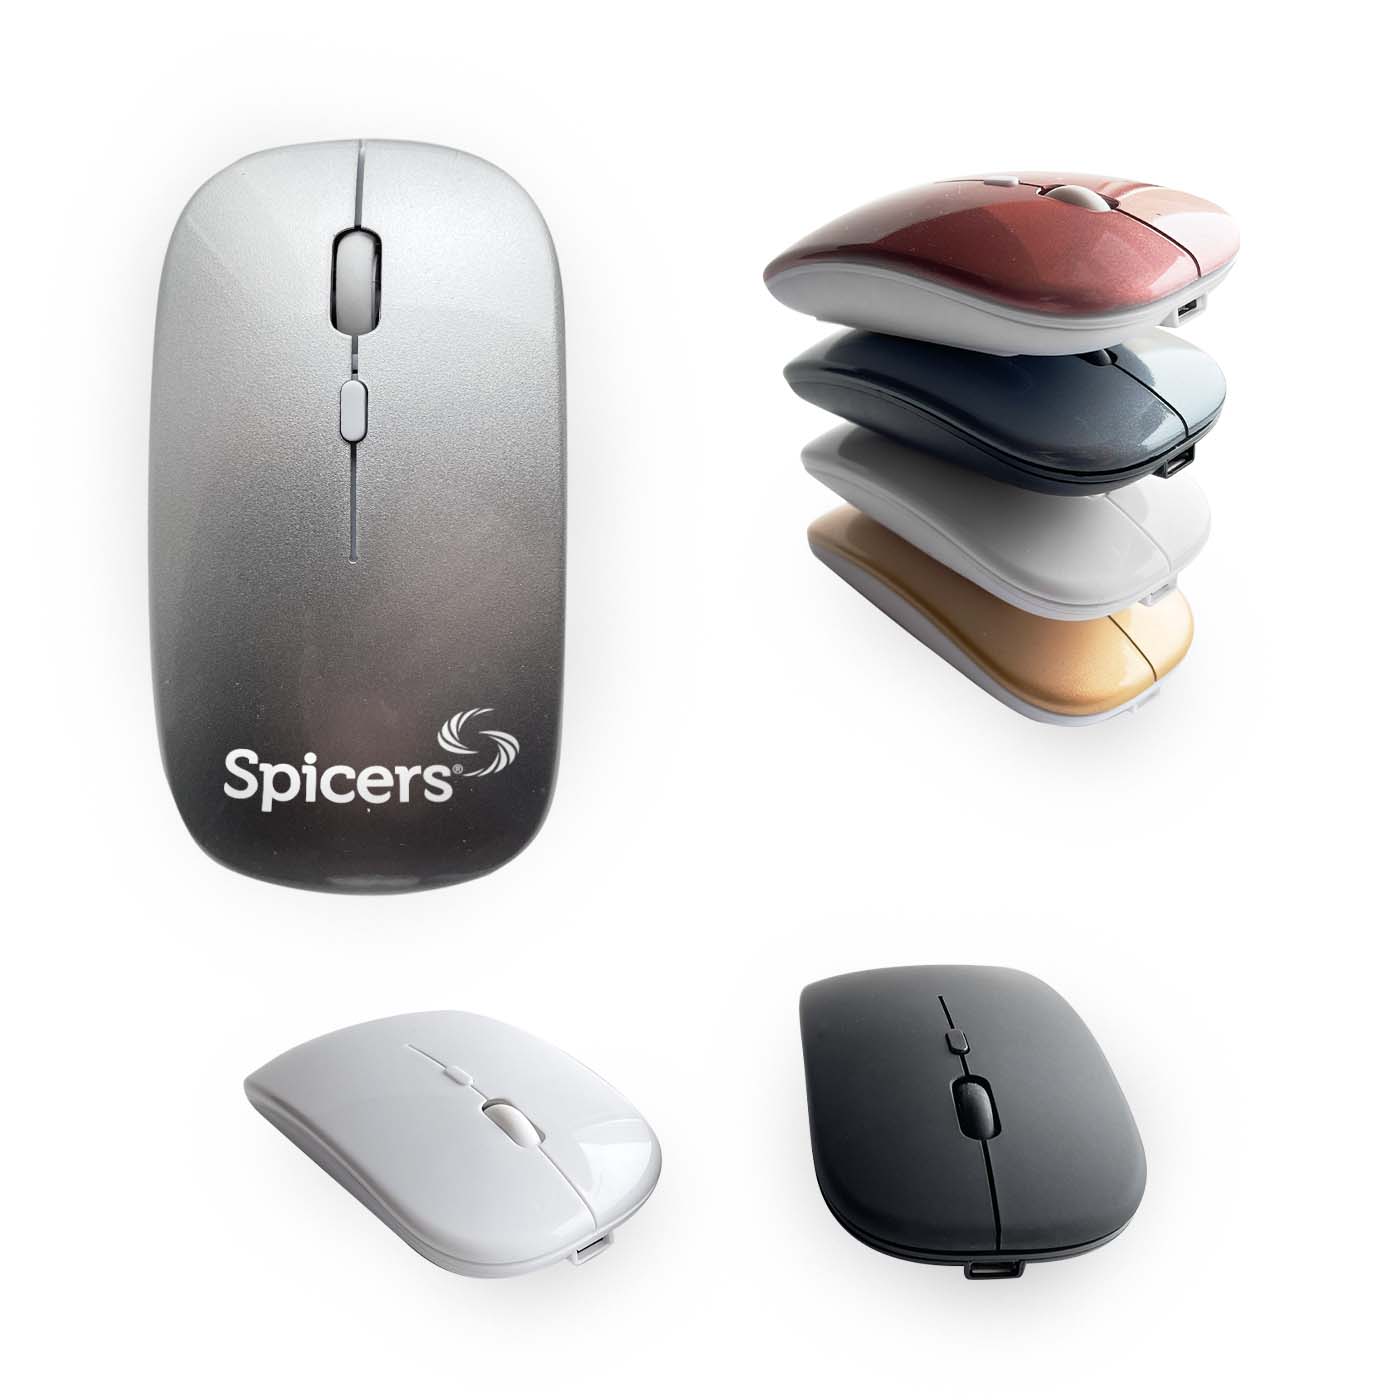 Rechargeable 2.4G interface Optical Wireless Mouse